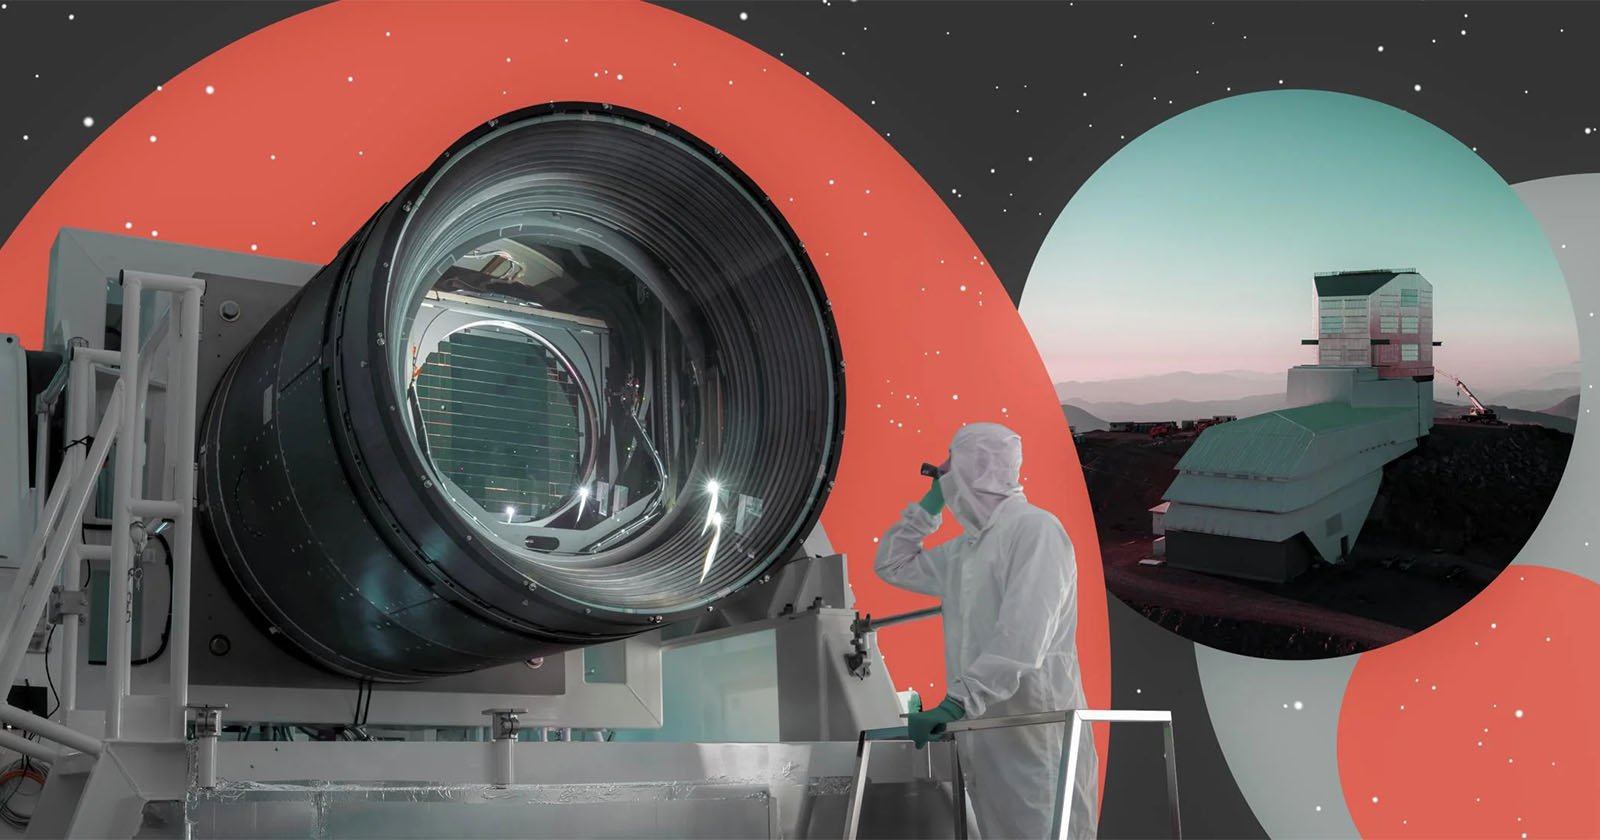 The Biggest Digital Camera Ever Is Ready to Solve Cosmic Mysteries 3,200 Megapixels At a Time